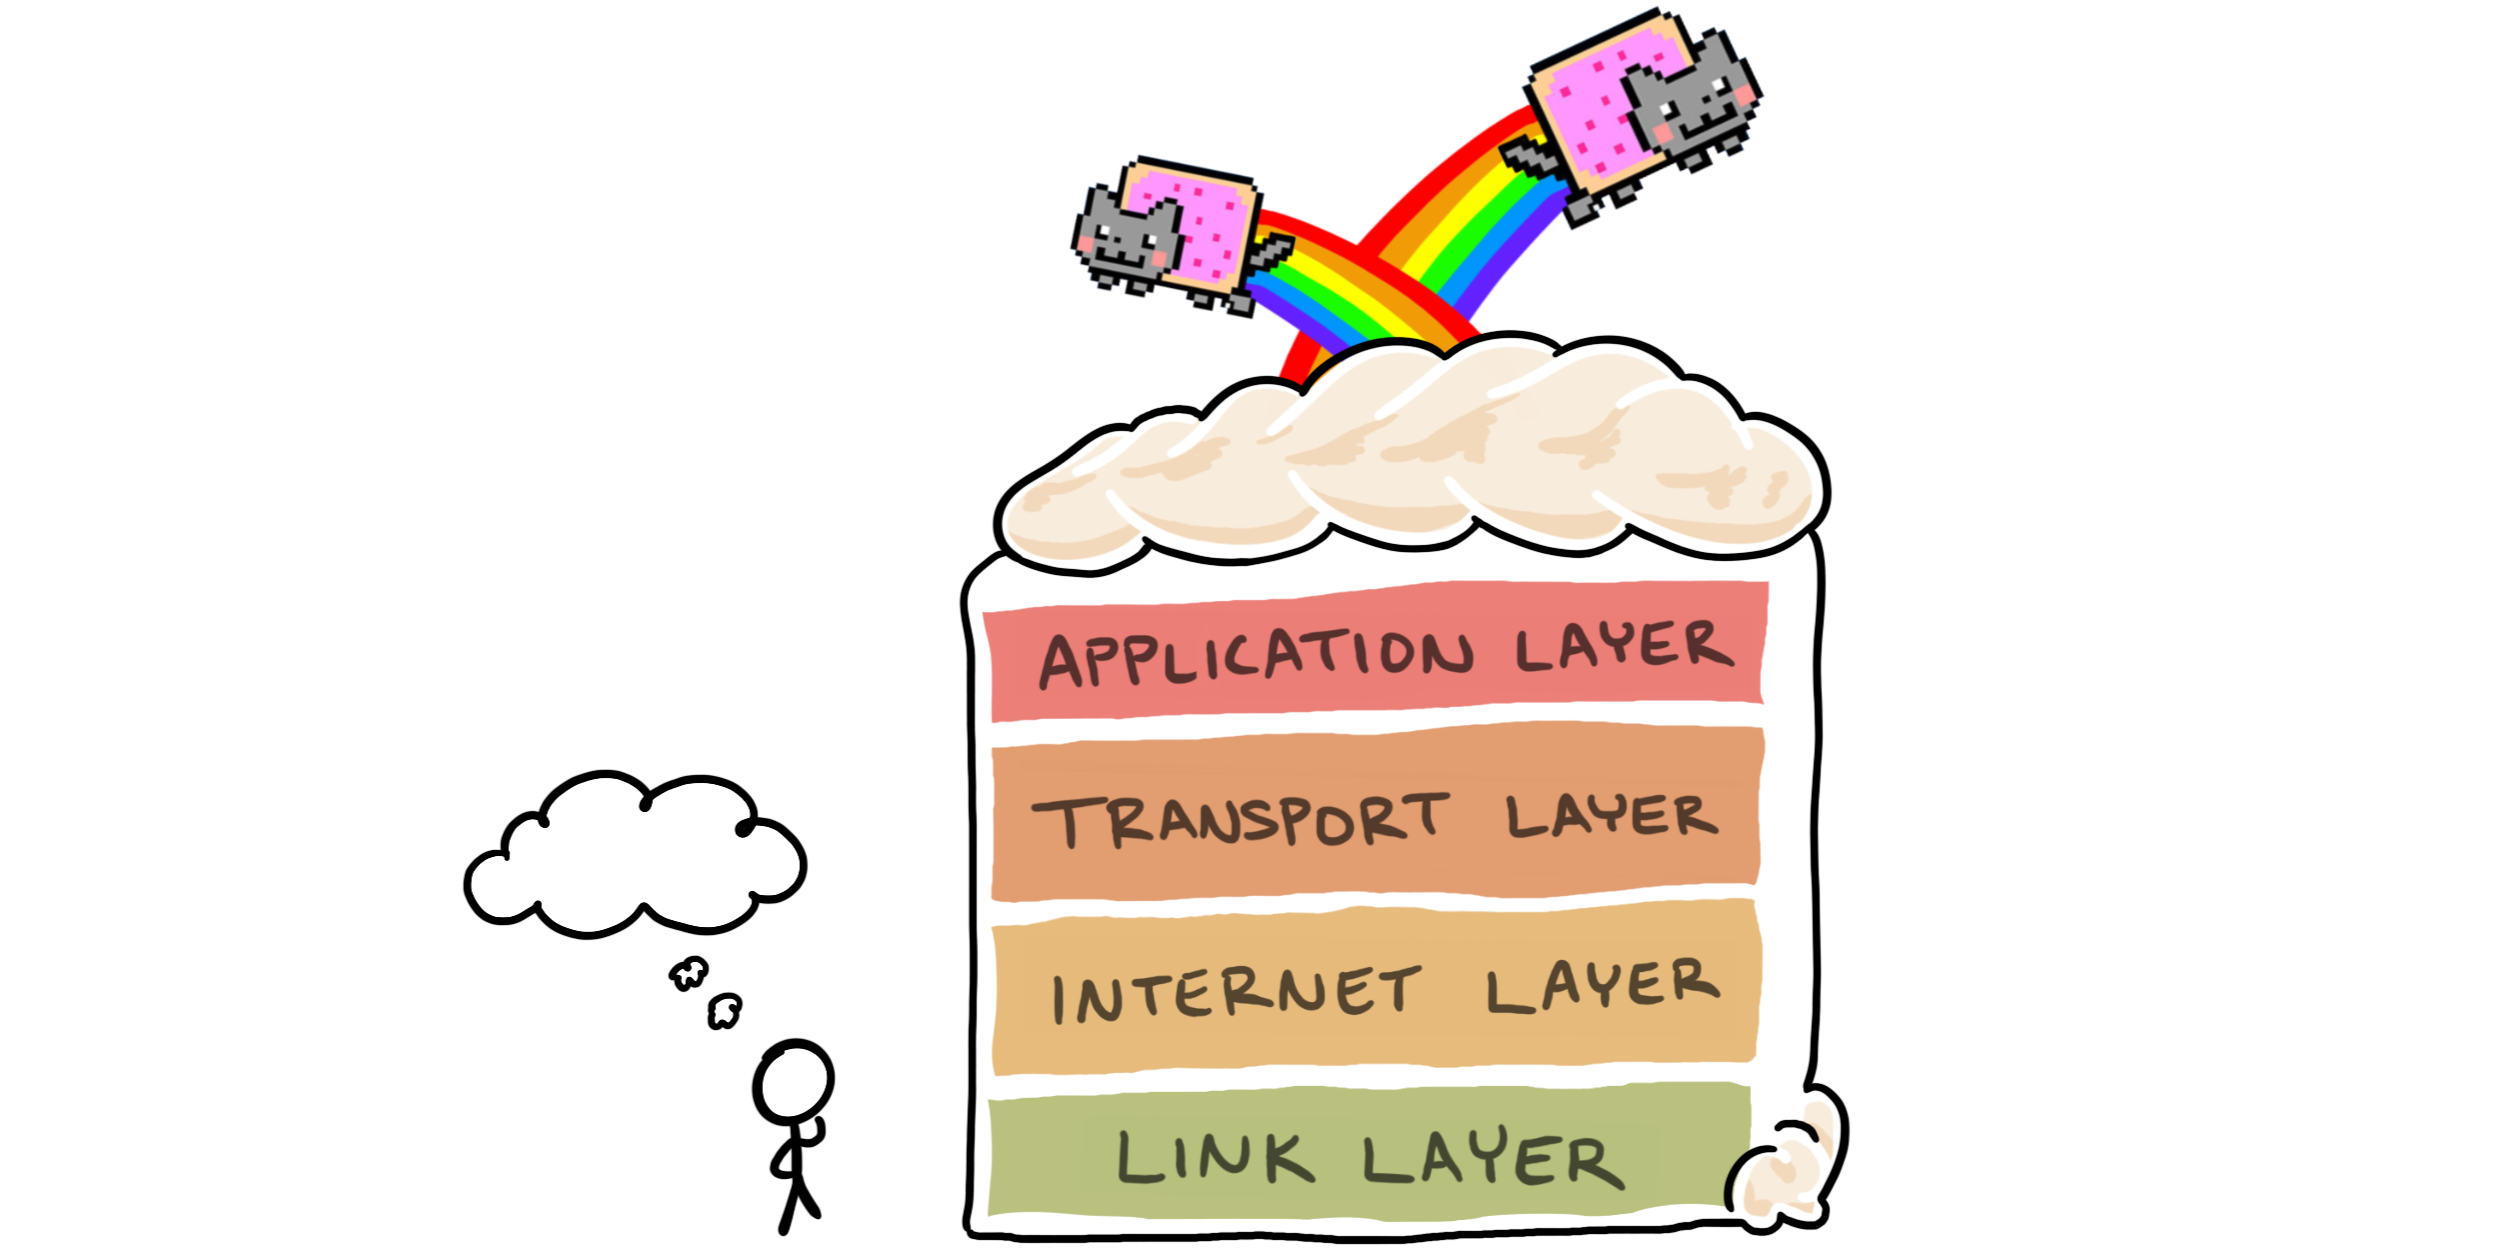 Cartoon of the full Internet layer cake, topped with Nyan Cat memes